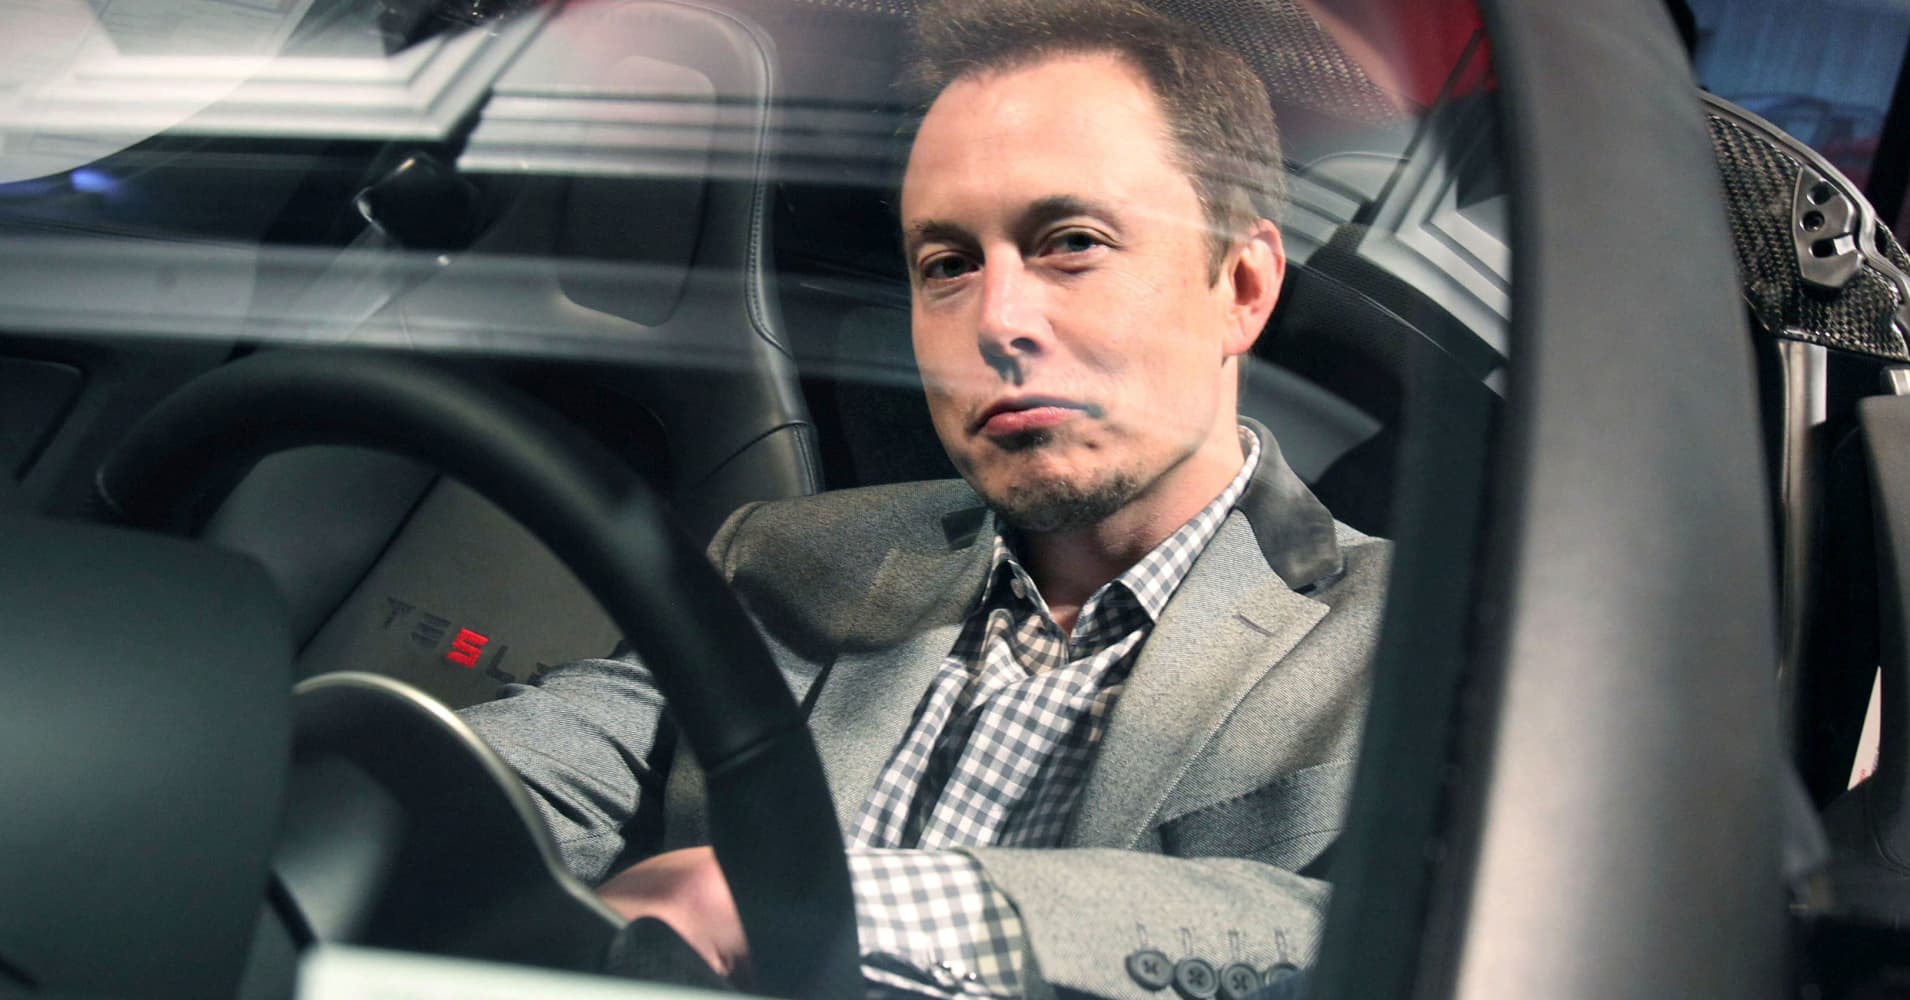 Elon Musk's extreme micro-management has wasted time and money at Tesla, insiders say